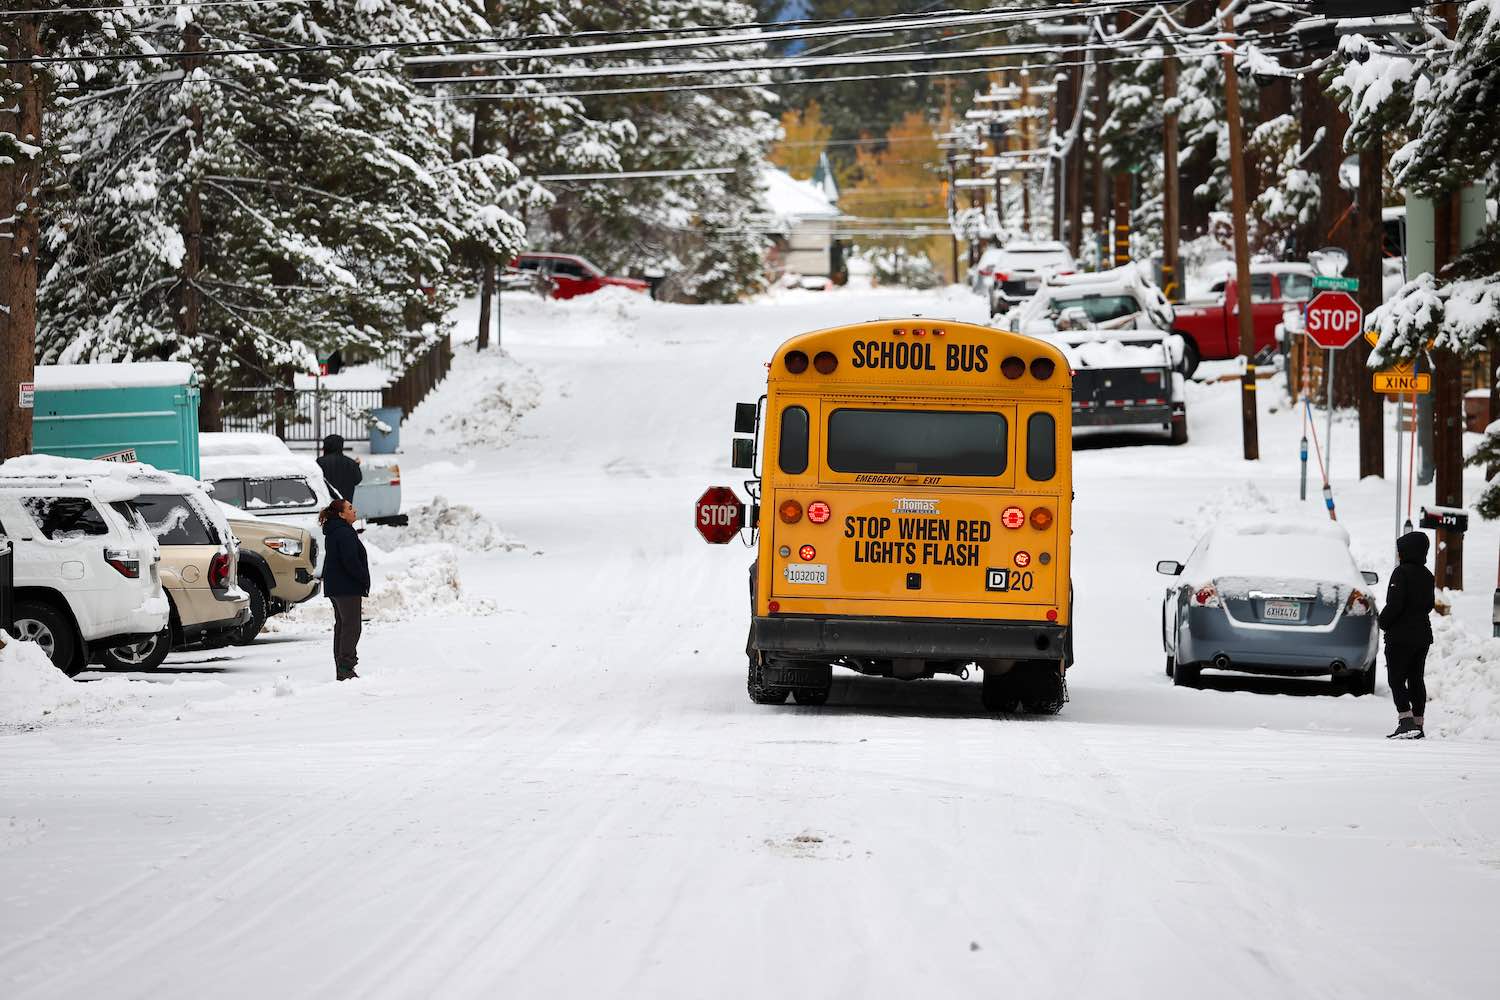 Parents watch students get on a school bus parked on a snowy street.